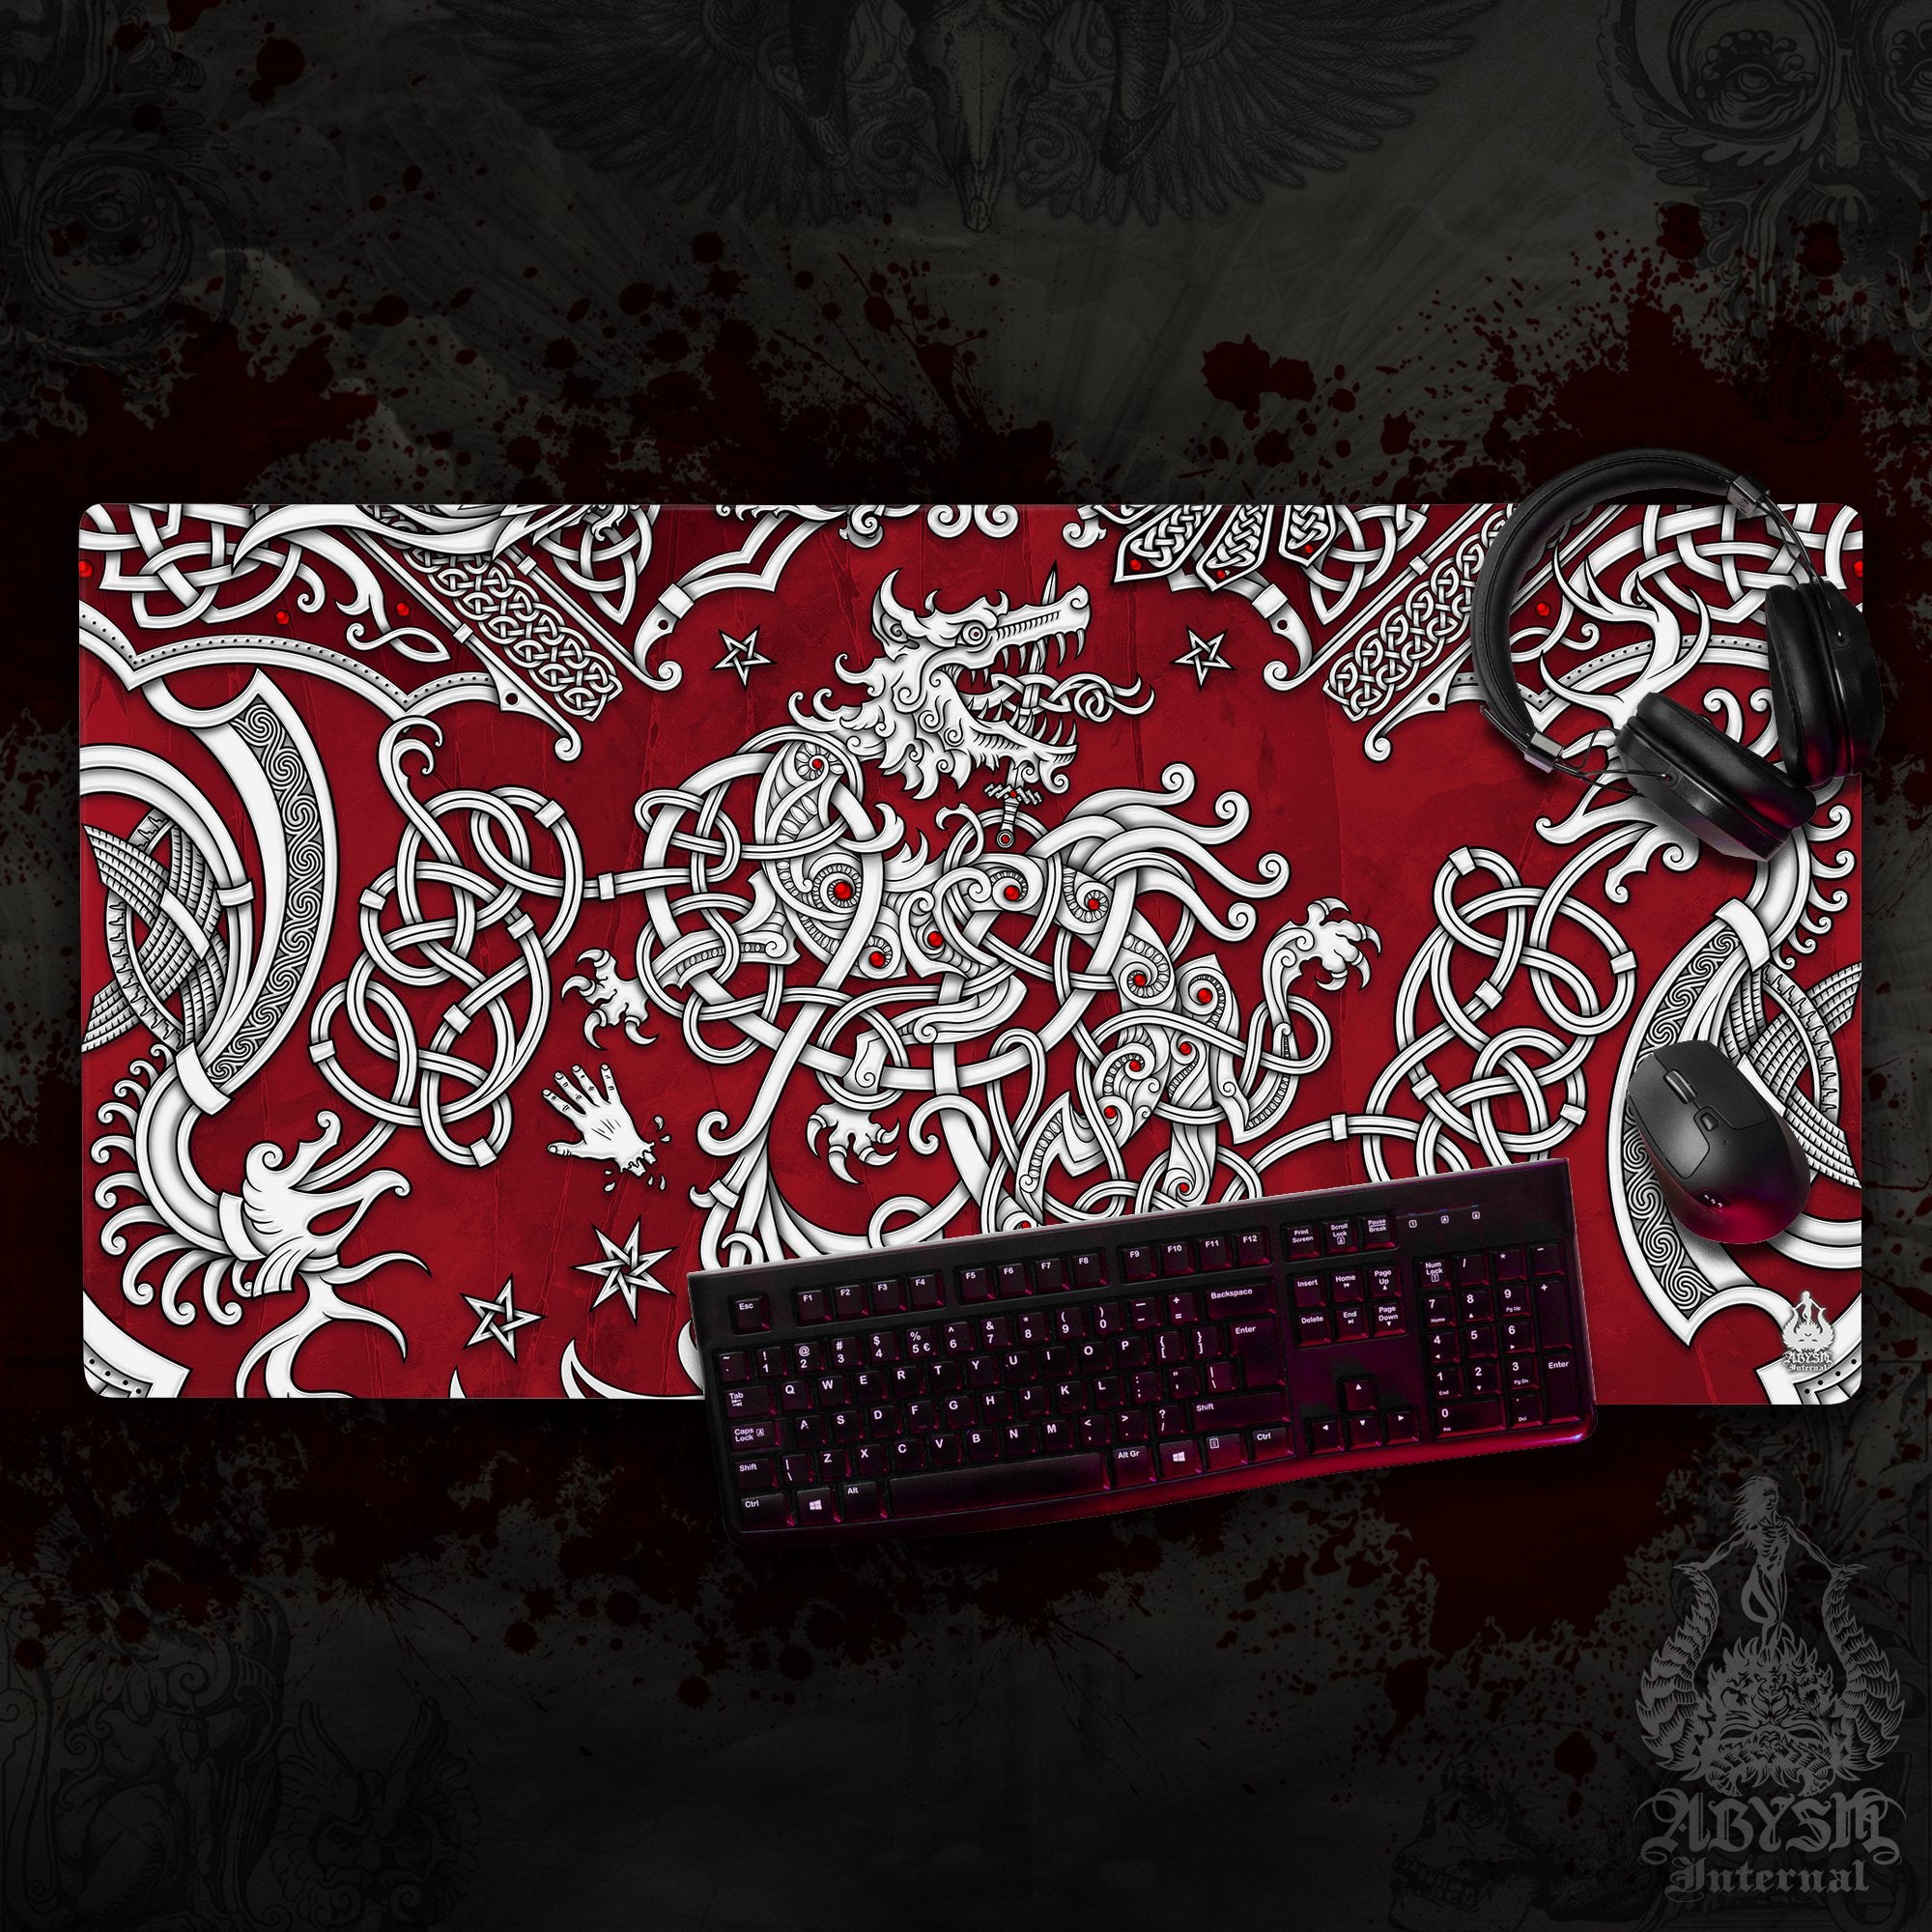 Viking Gaming Desk Mat, Fenrir Mouse Pad, Norse Knotwork Table Protector Cover, Nordic Wolf Workpad, Art Print - White, 3 Colors - Abysm Internal